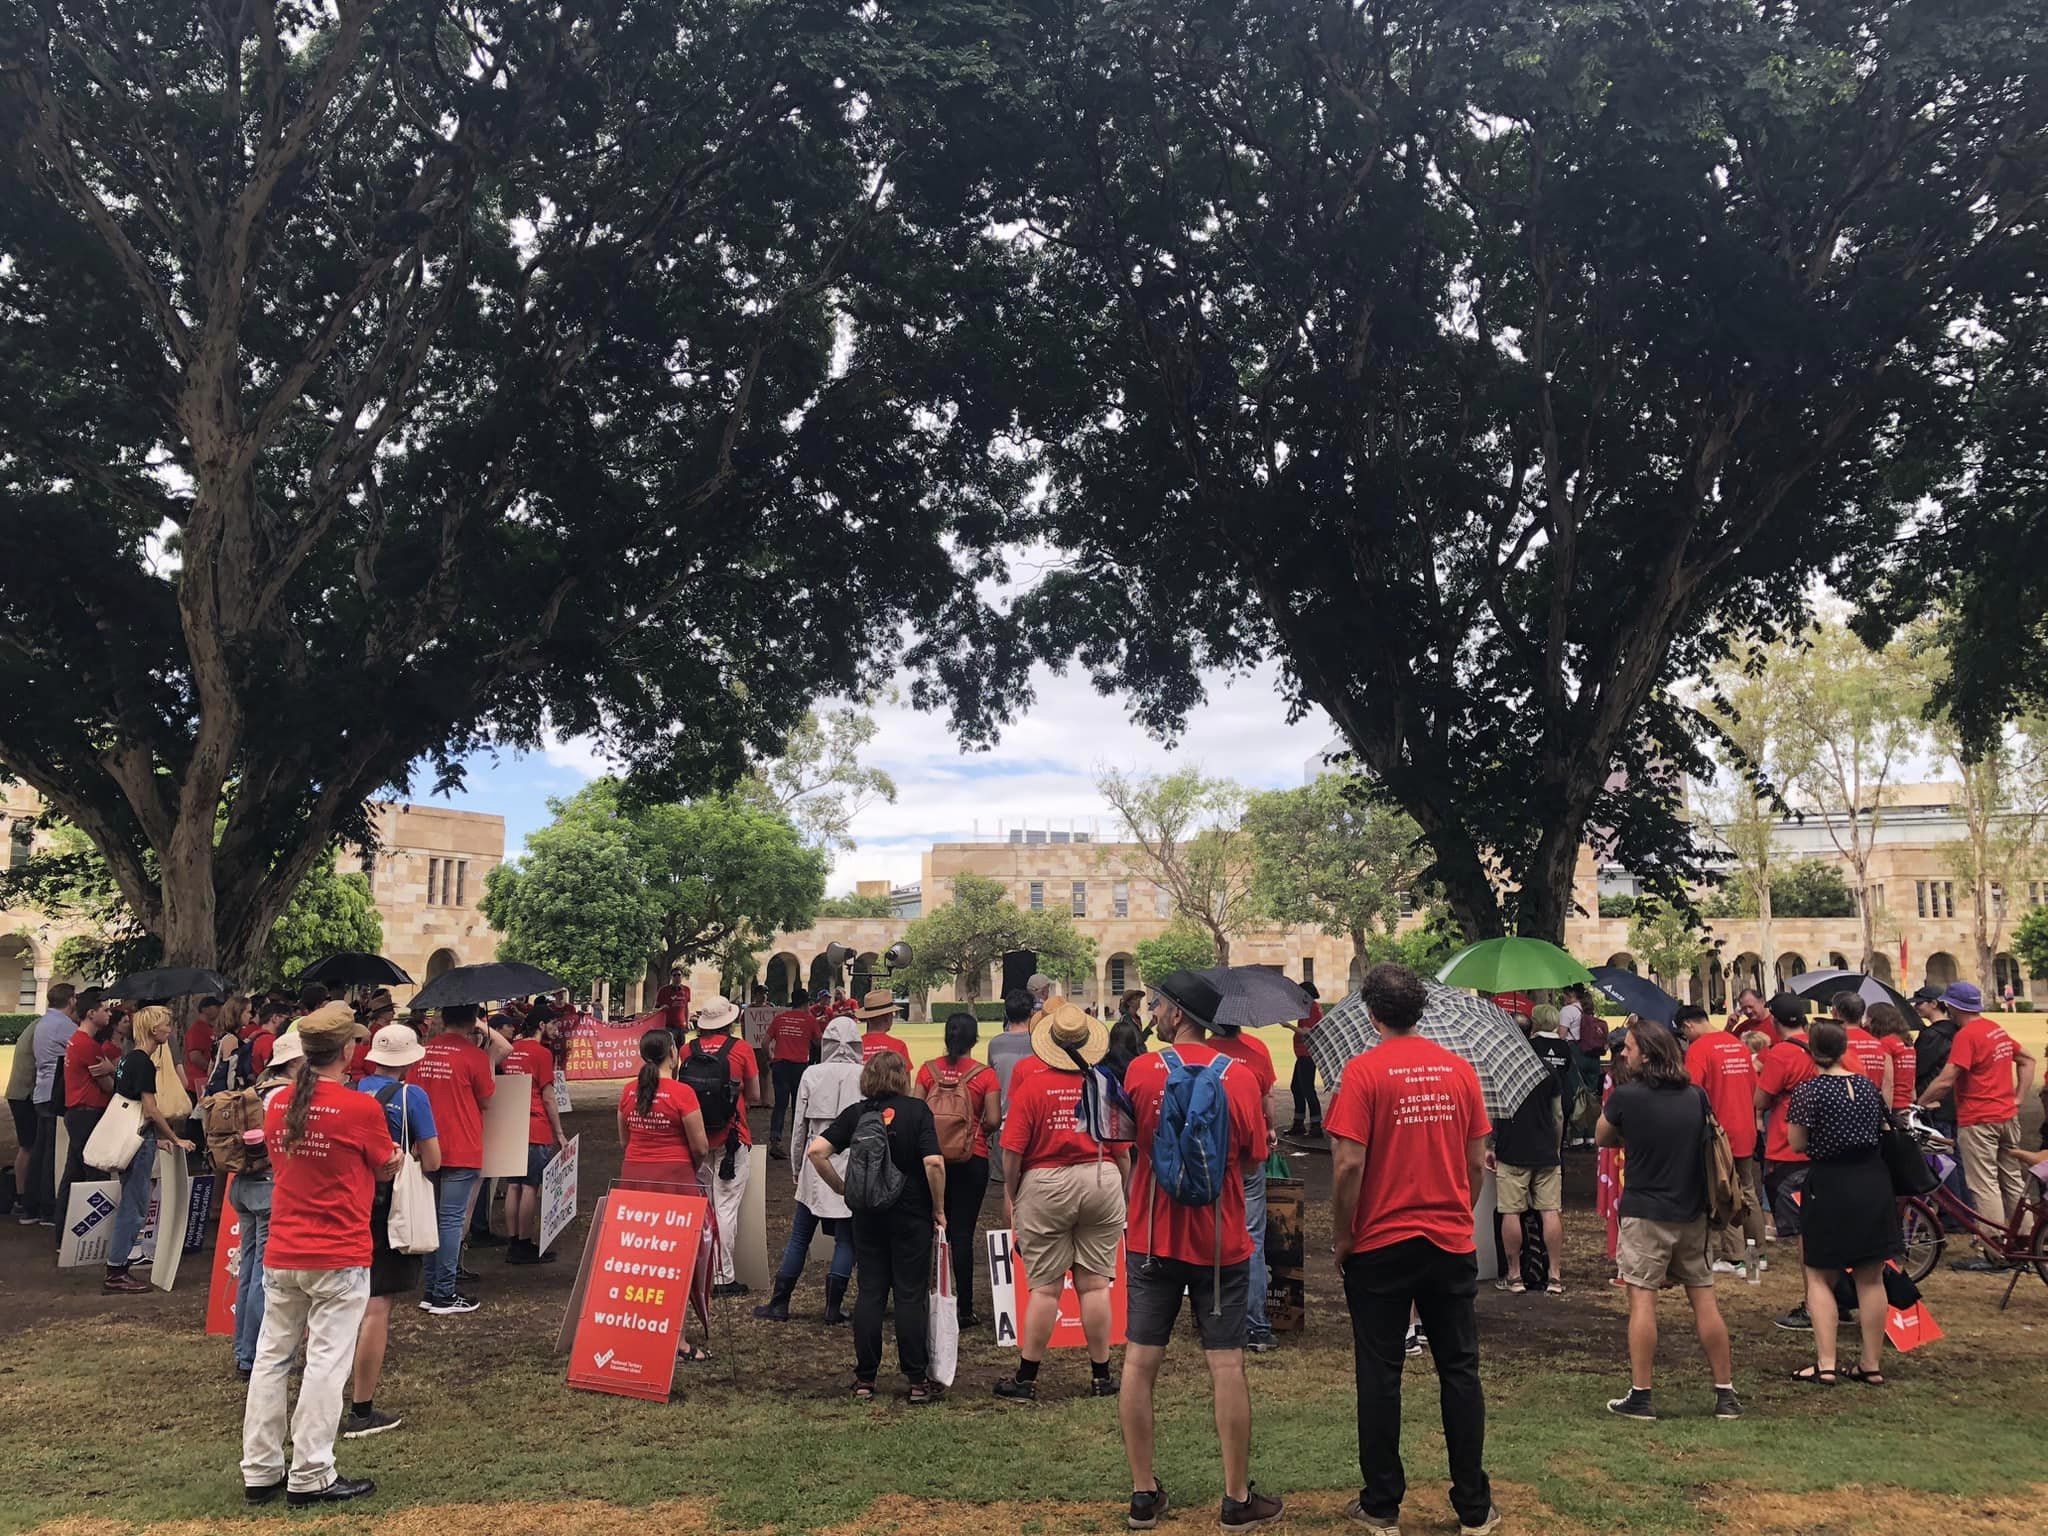 A crowd of protestors in red NTEU shirts standing and facing away from the camera. They are under trees in UQ's Great Court.